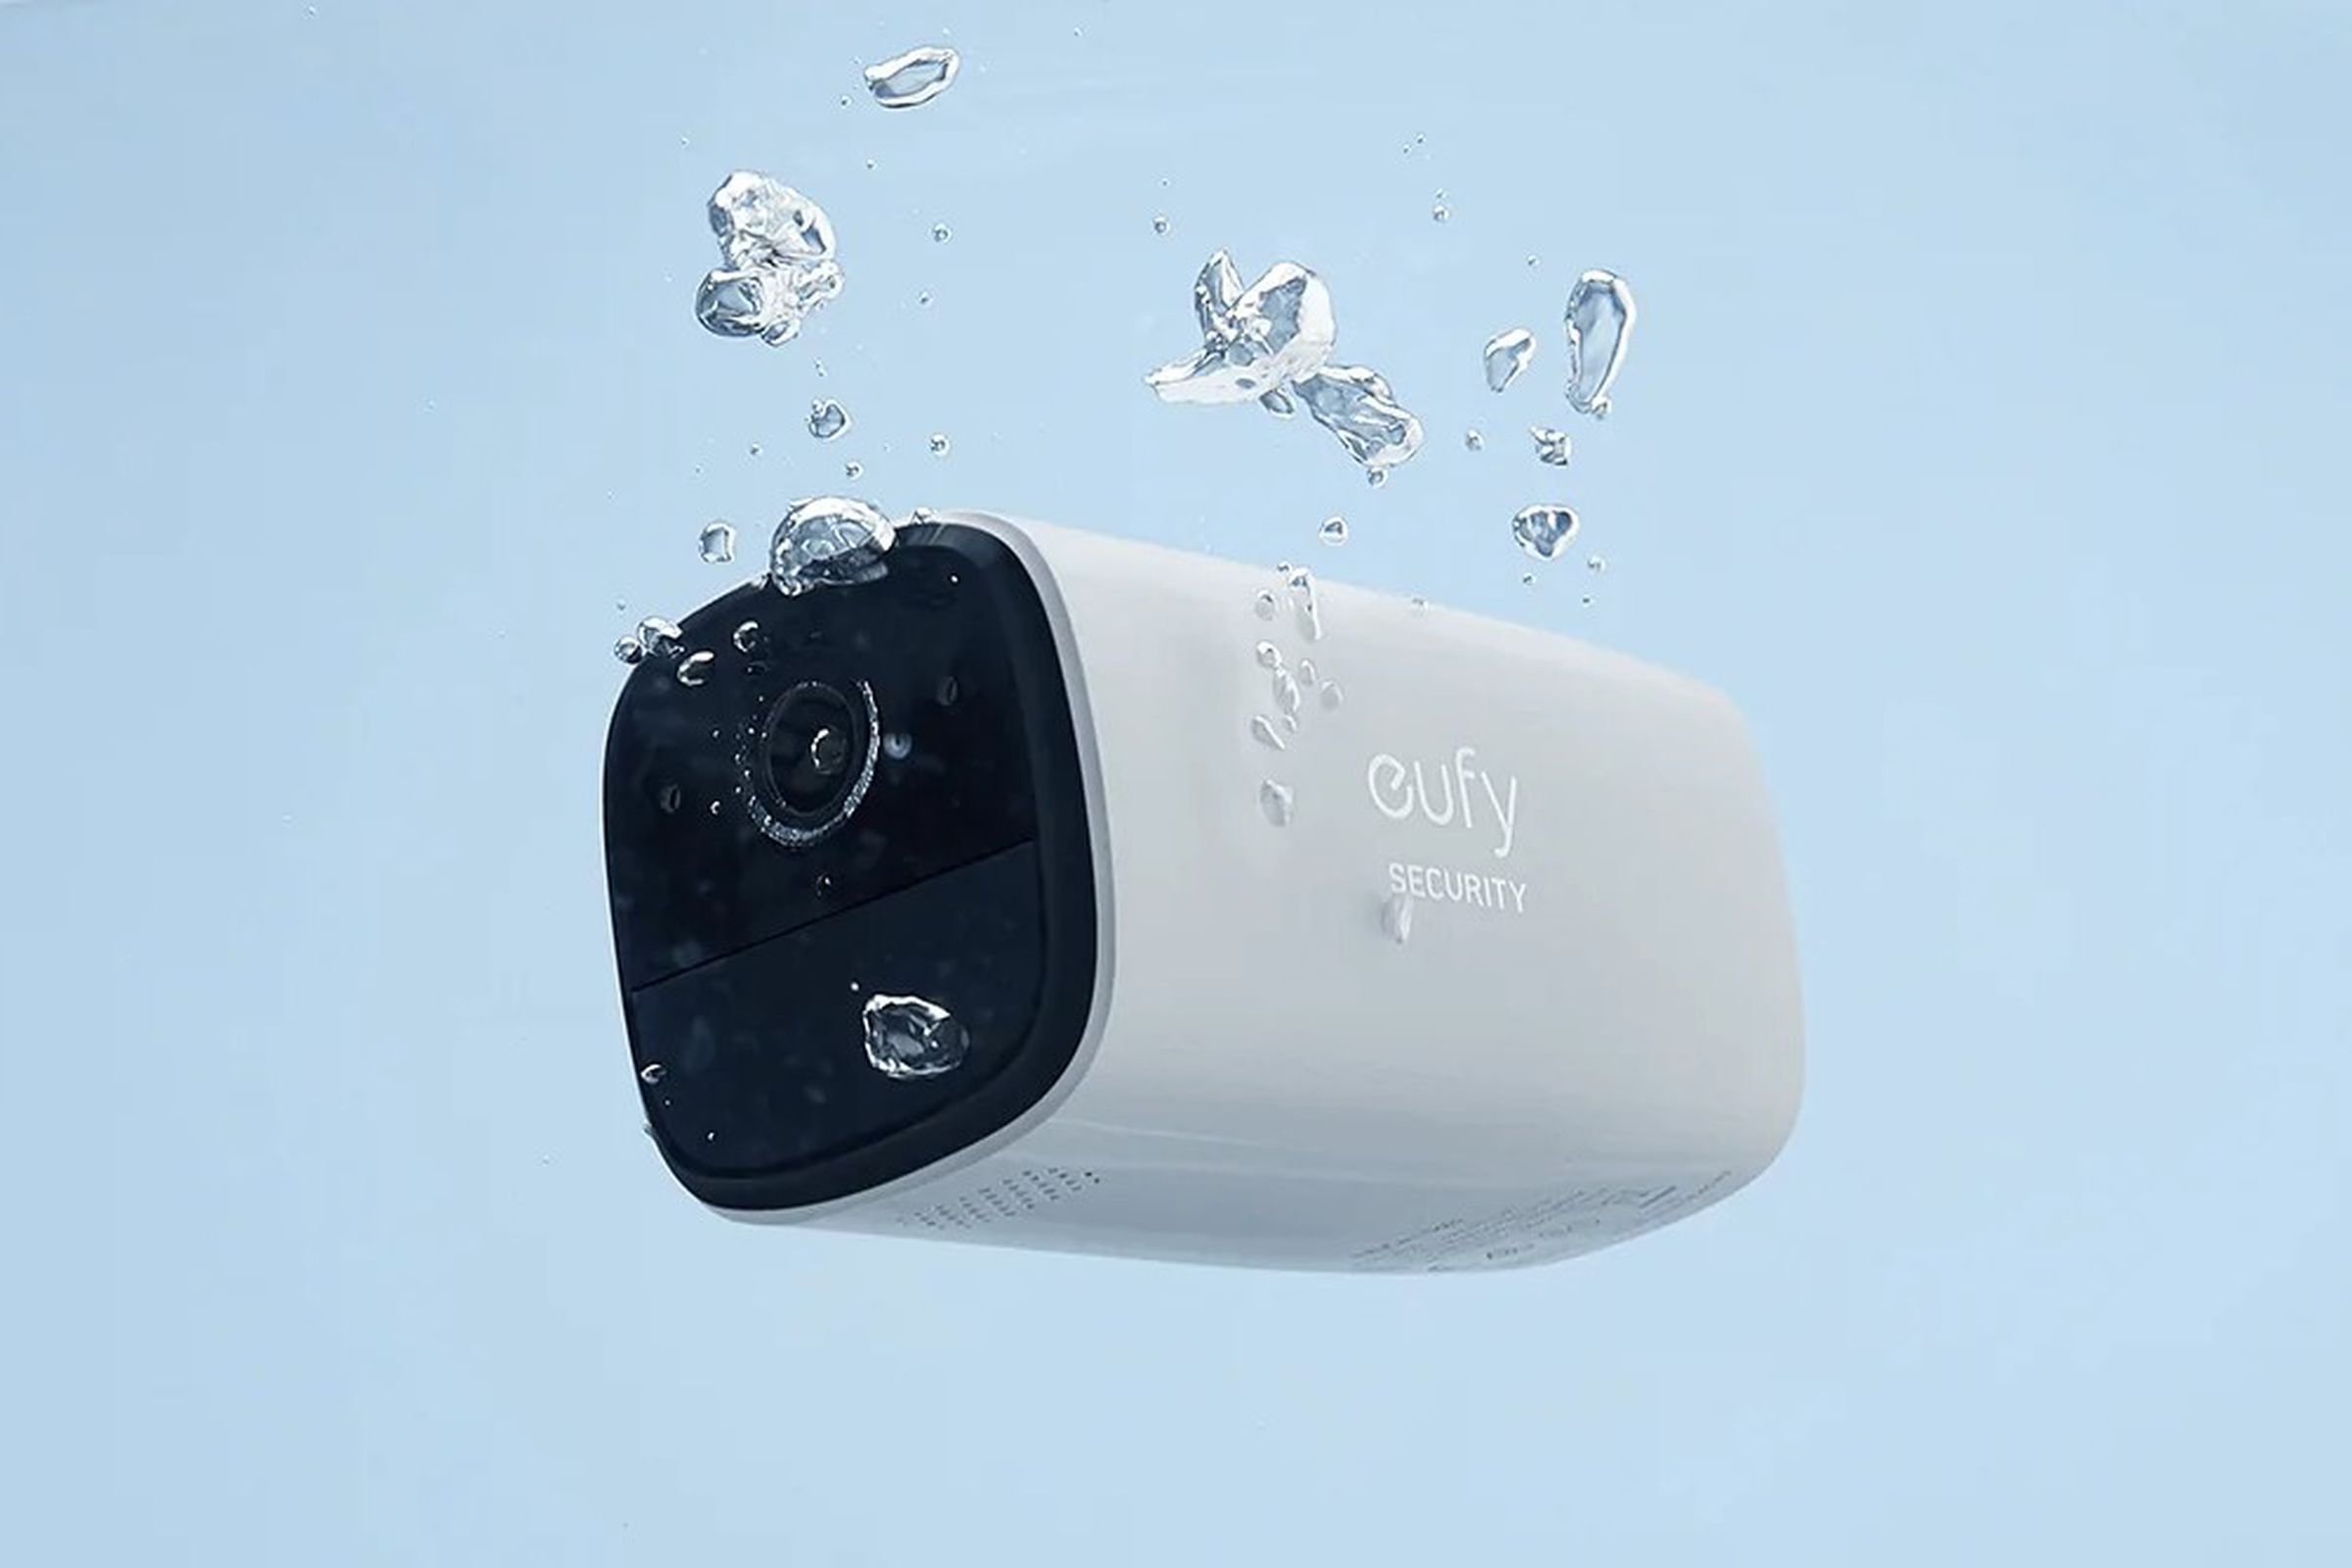 A Eufy camera underwater, air bubbles bubbling up